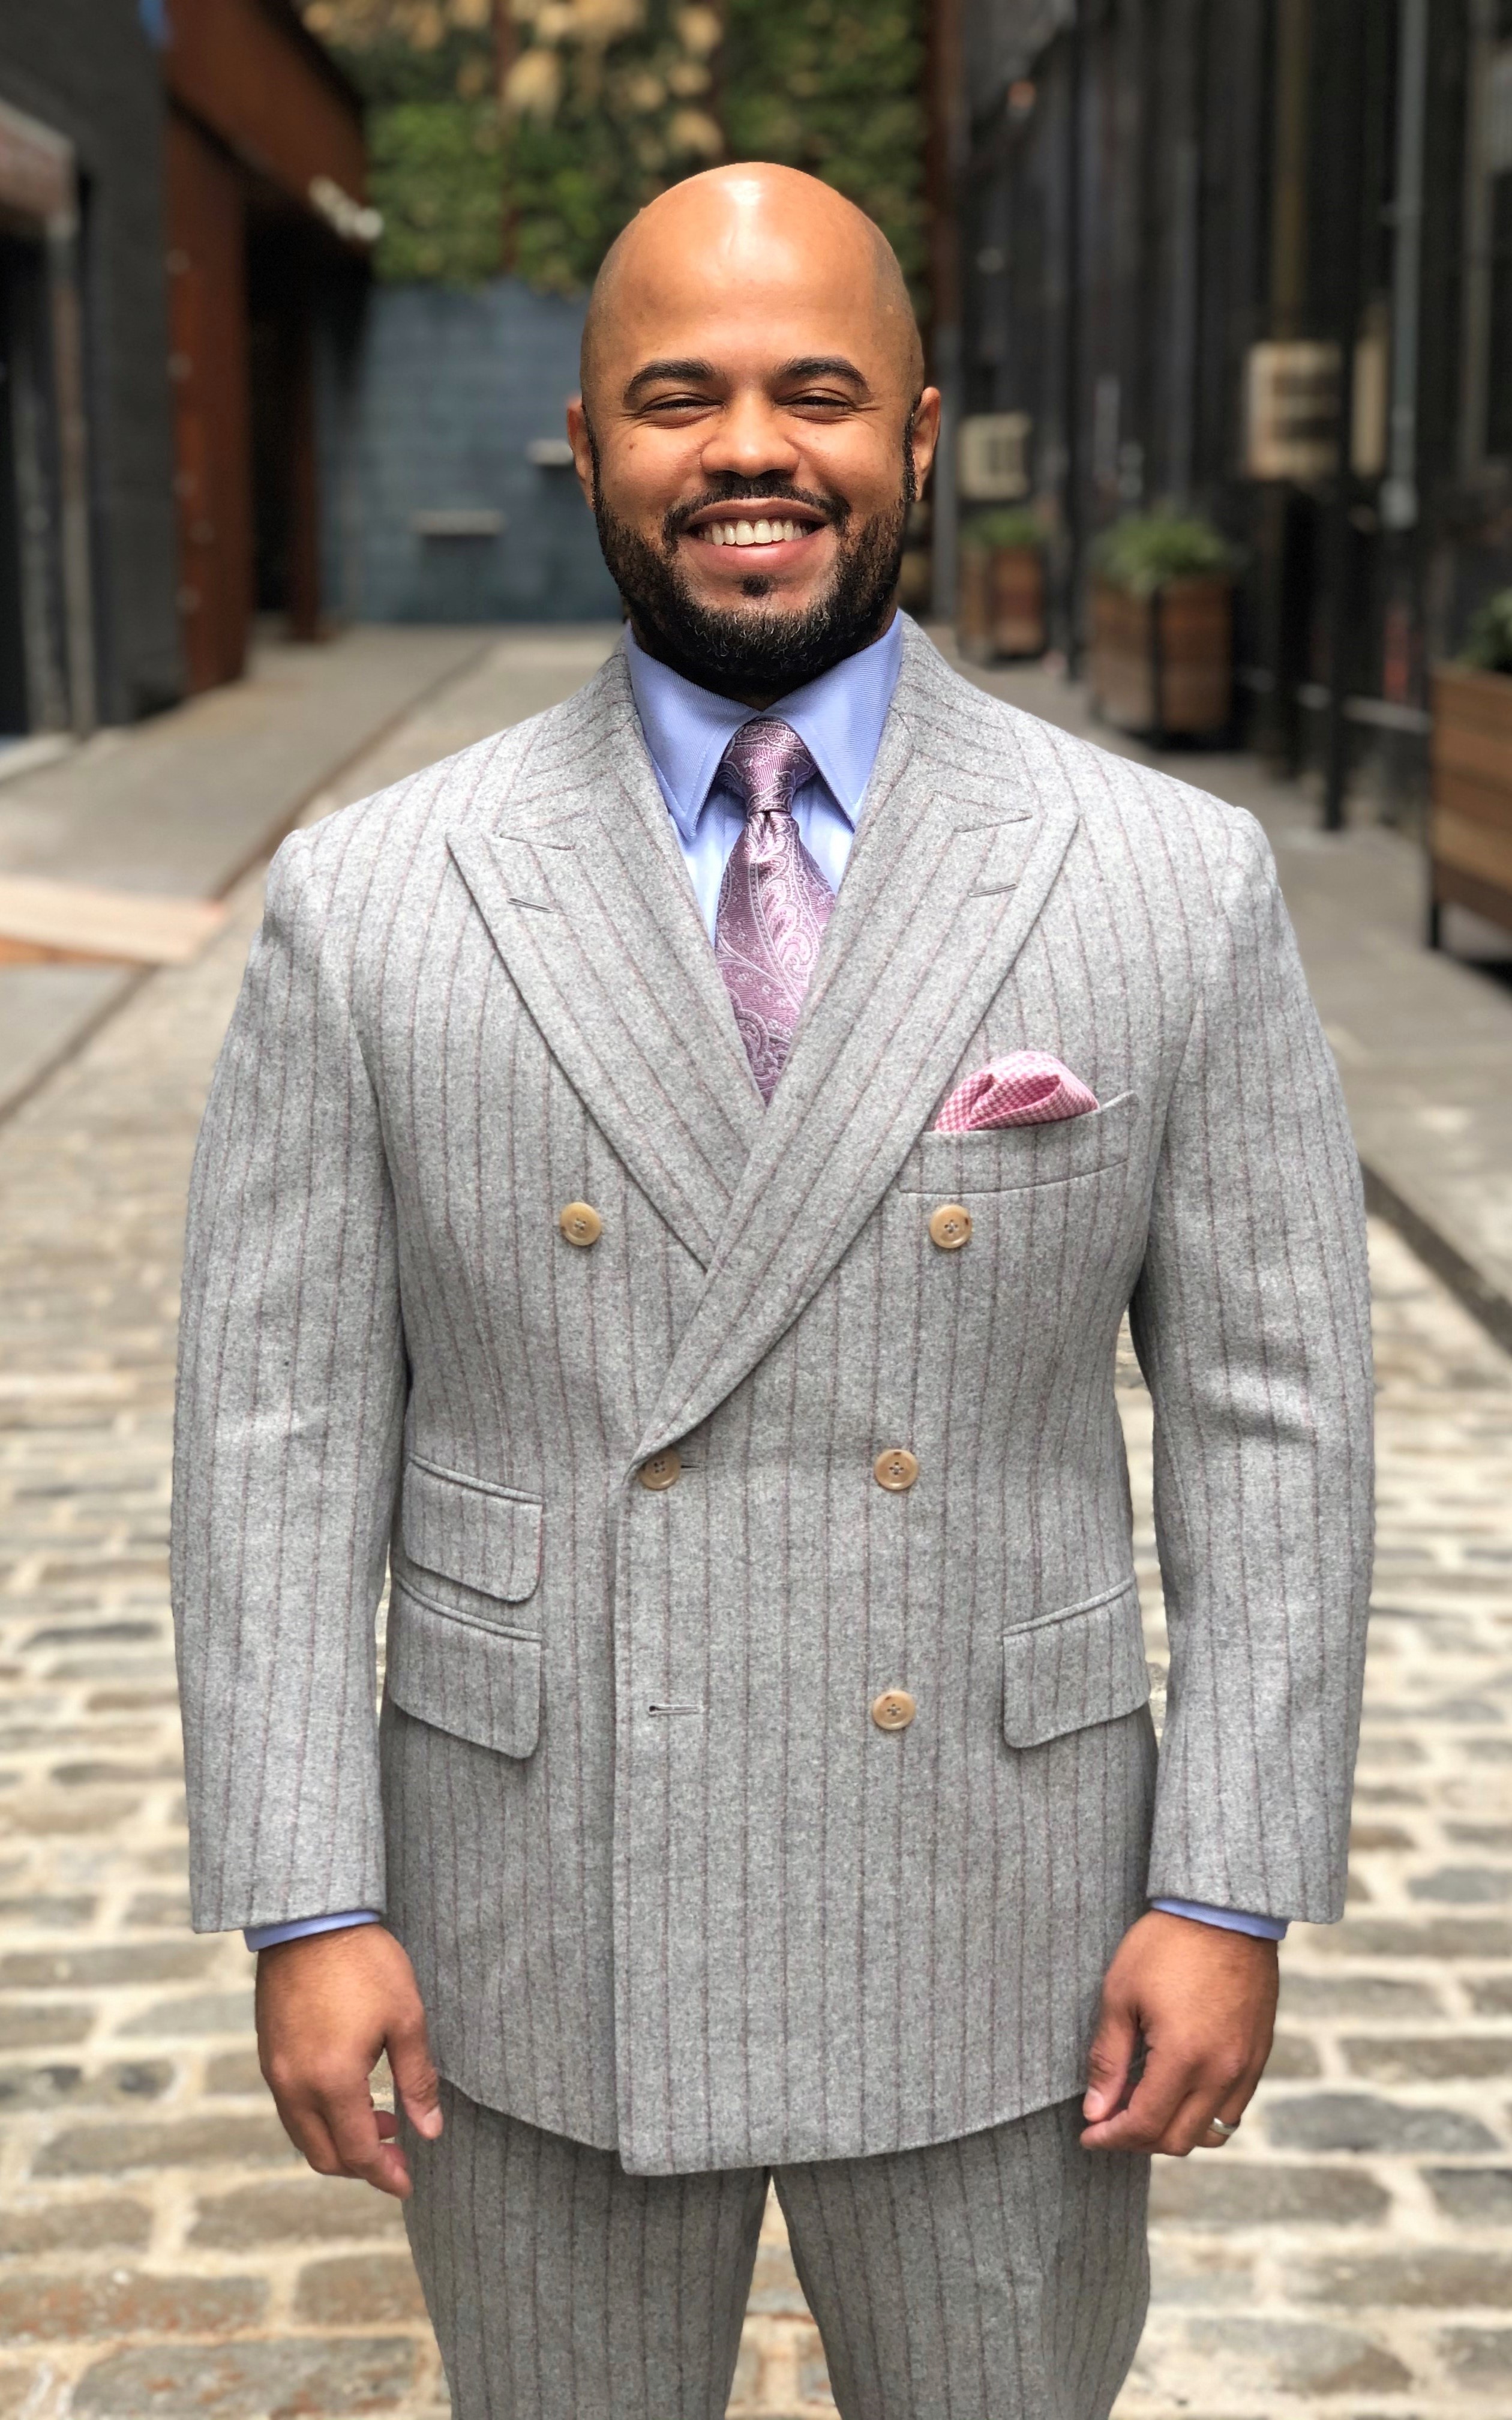 MTM Light Grey Double Stripe Double Breasted Suit